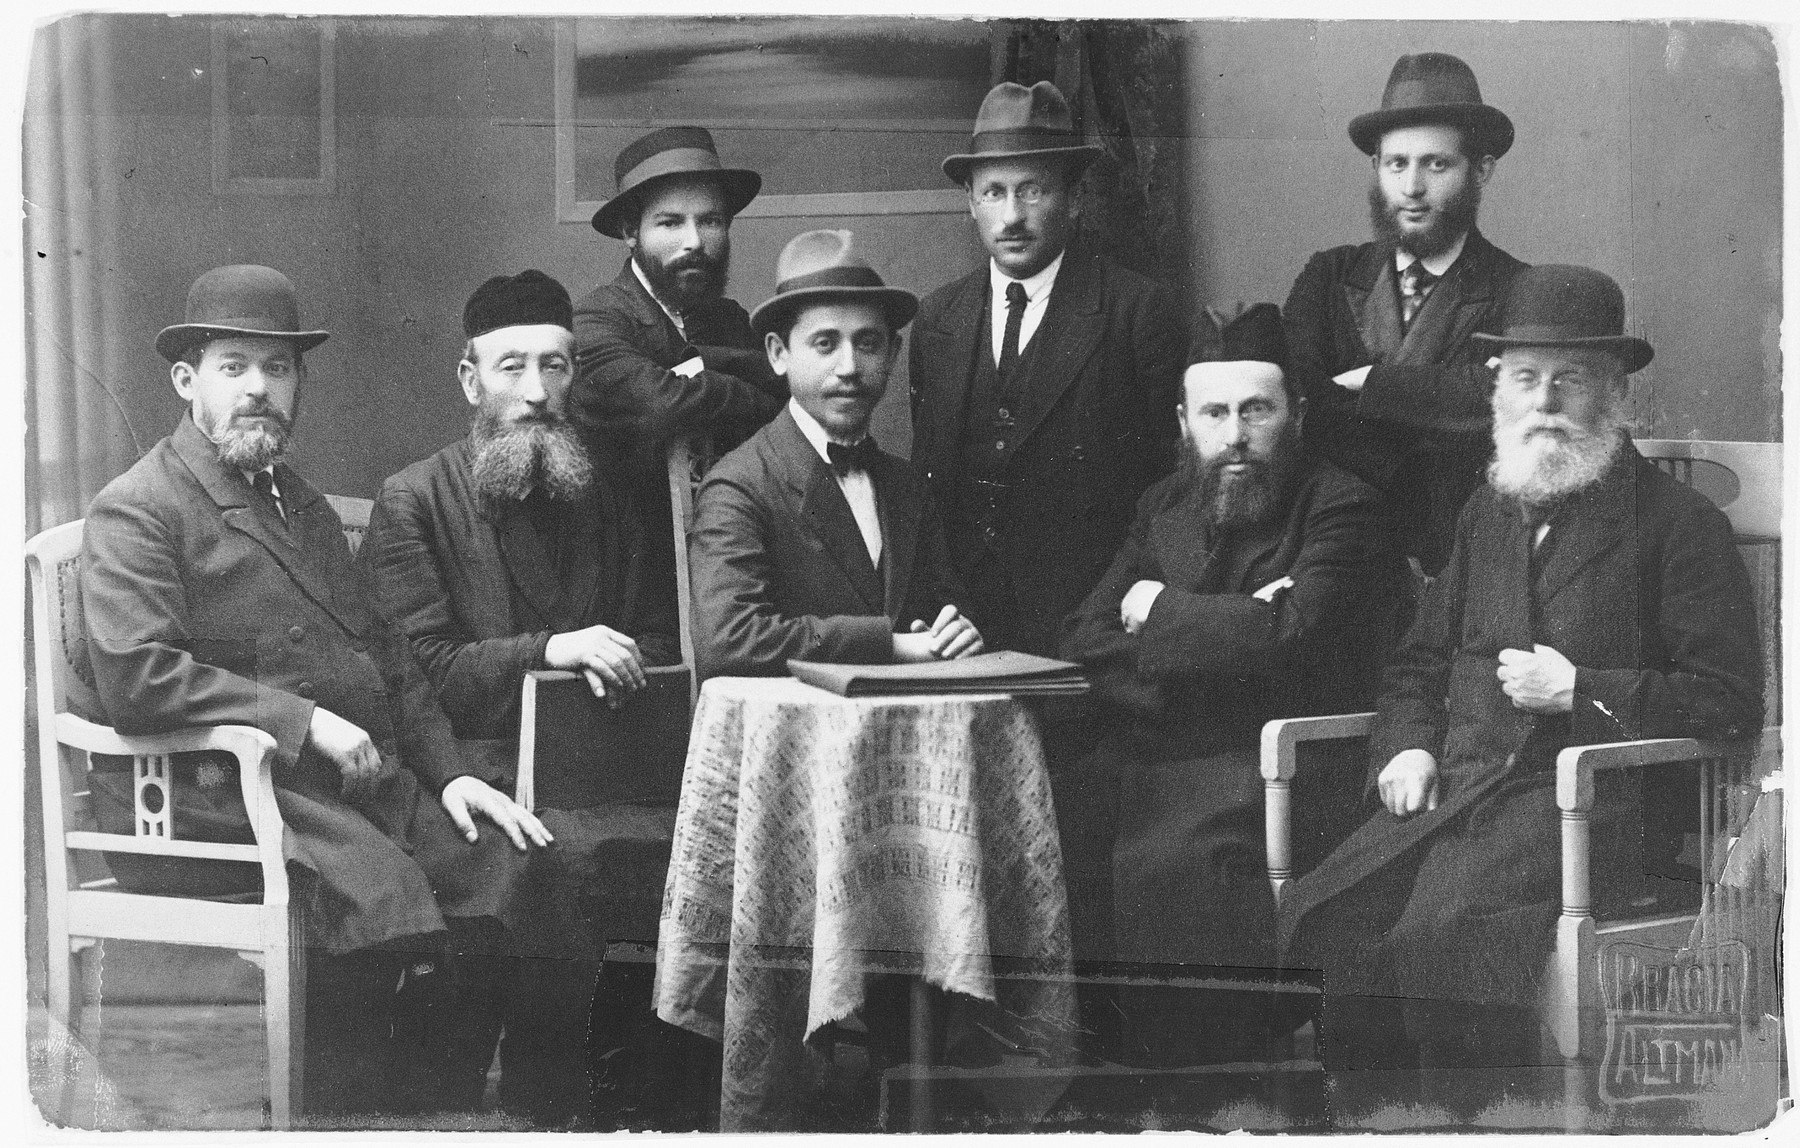 Group portrait of religious Jews in Sosnowiec.

Seated first from the right is Yosef Israel Wroncberg who was a rabbinics teacher.

The photo was taken in the studio Stanislas Altman, a Jewish photographer who perished in Auschwitz.